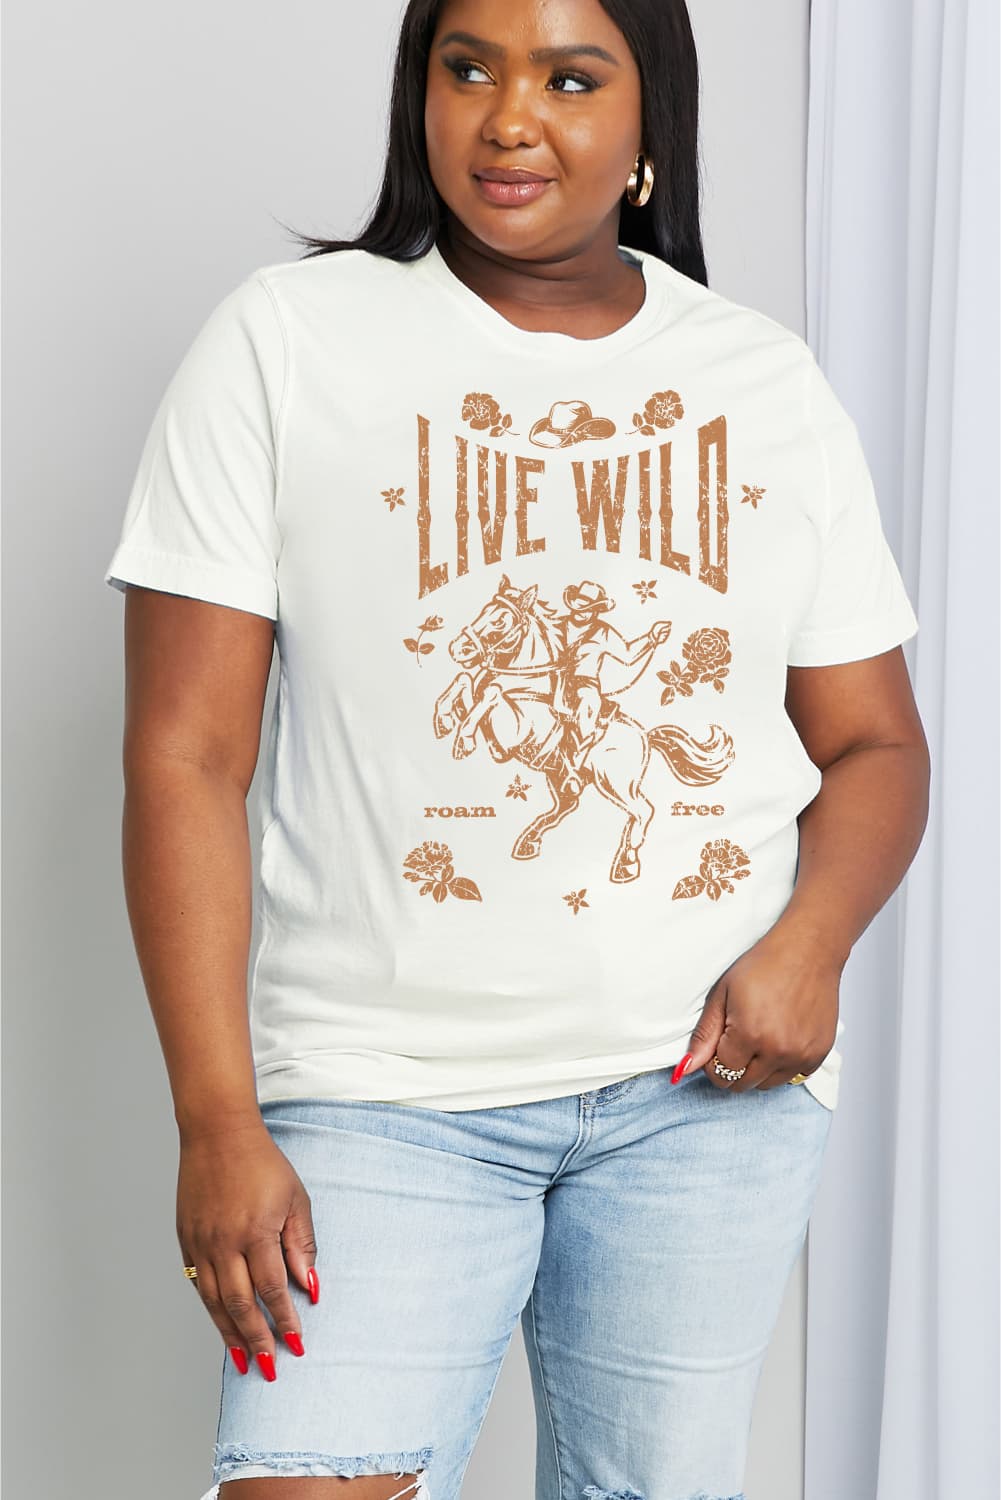 Simply Love Full Size LIVE WILD ROAM FREE Graphic Cotton Tee